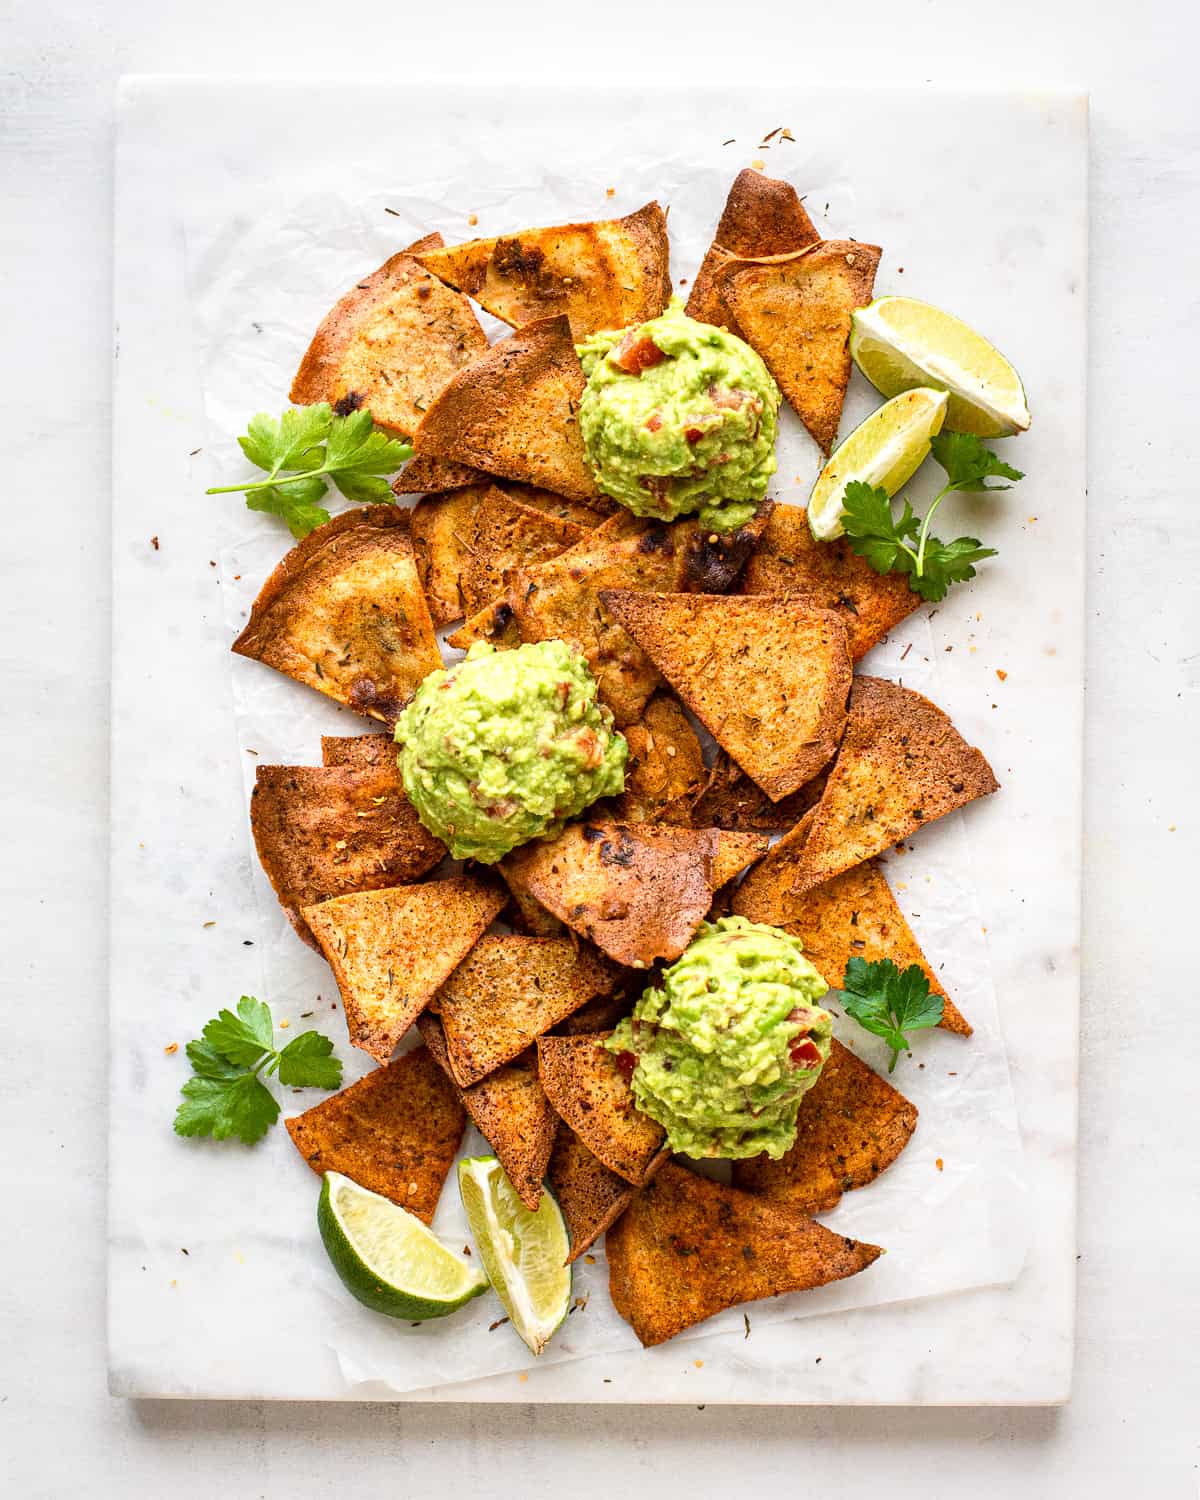 Baked nachos from tortillas on a white marble platter with guacamole, lime and fresh cilantro.